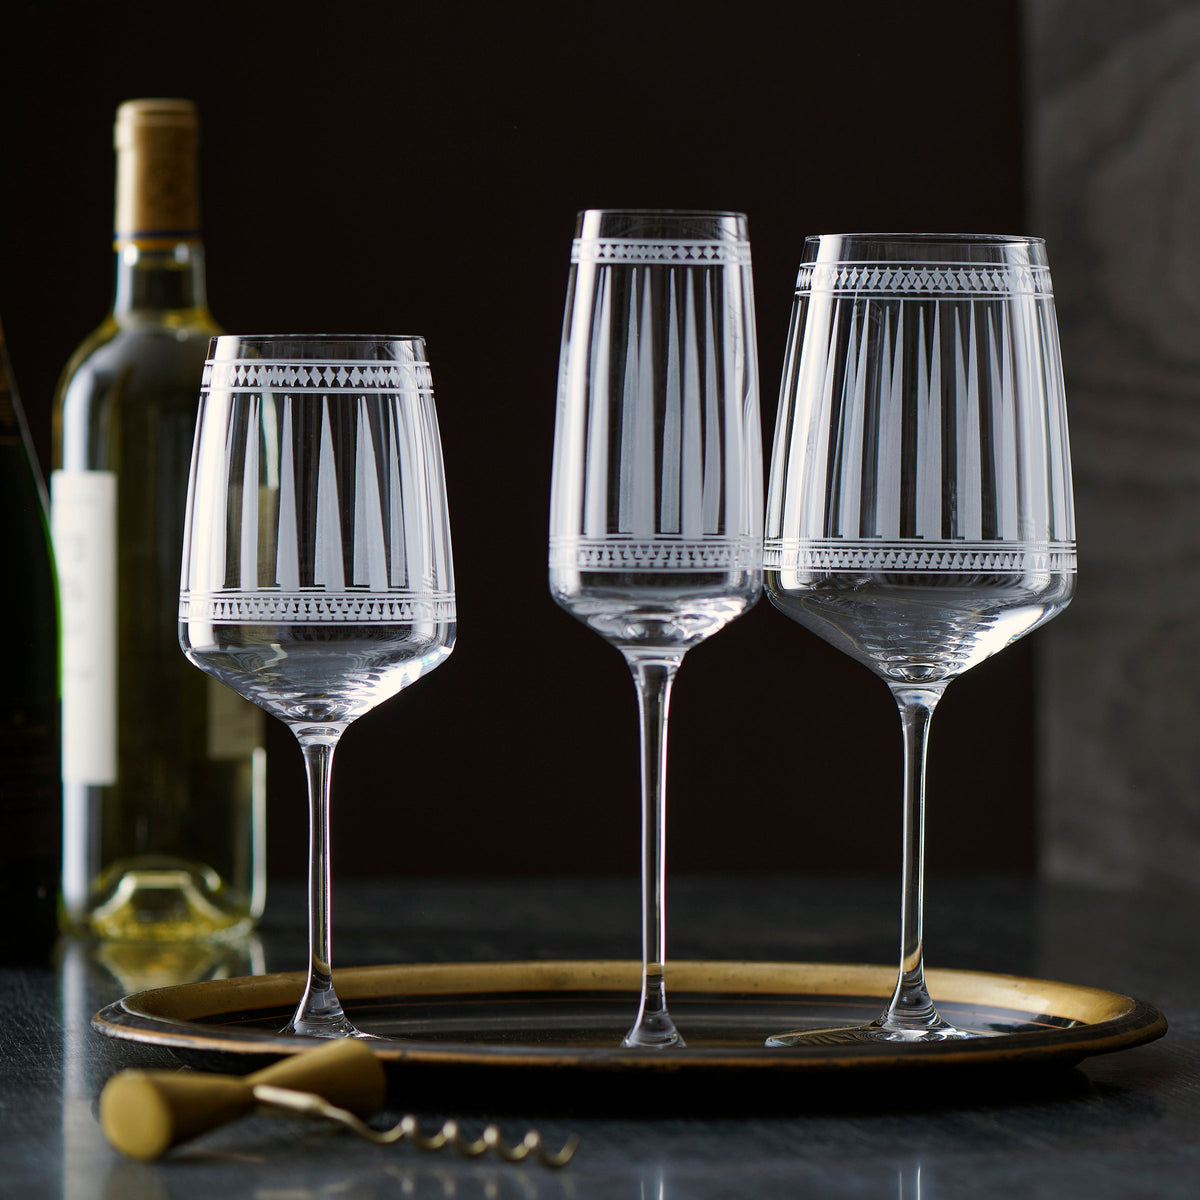 Three Marrakech White Wine Glasses by Caskata Artisanal Home on a tray next to a bottle of white wine.